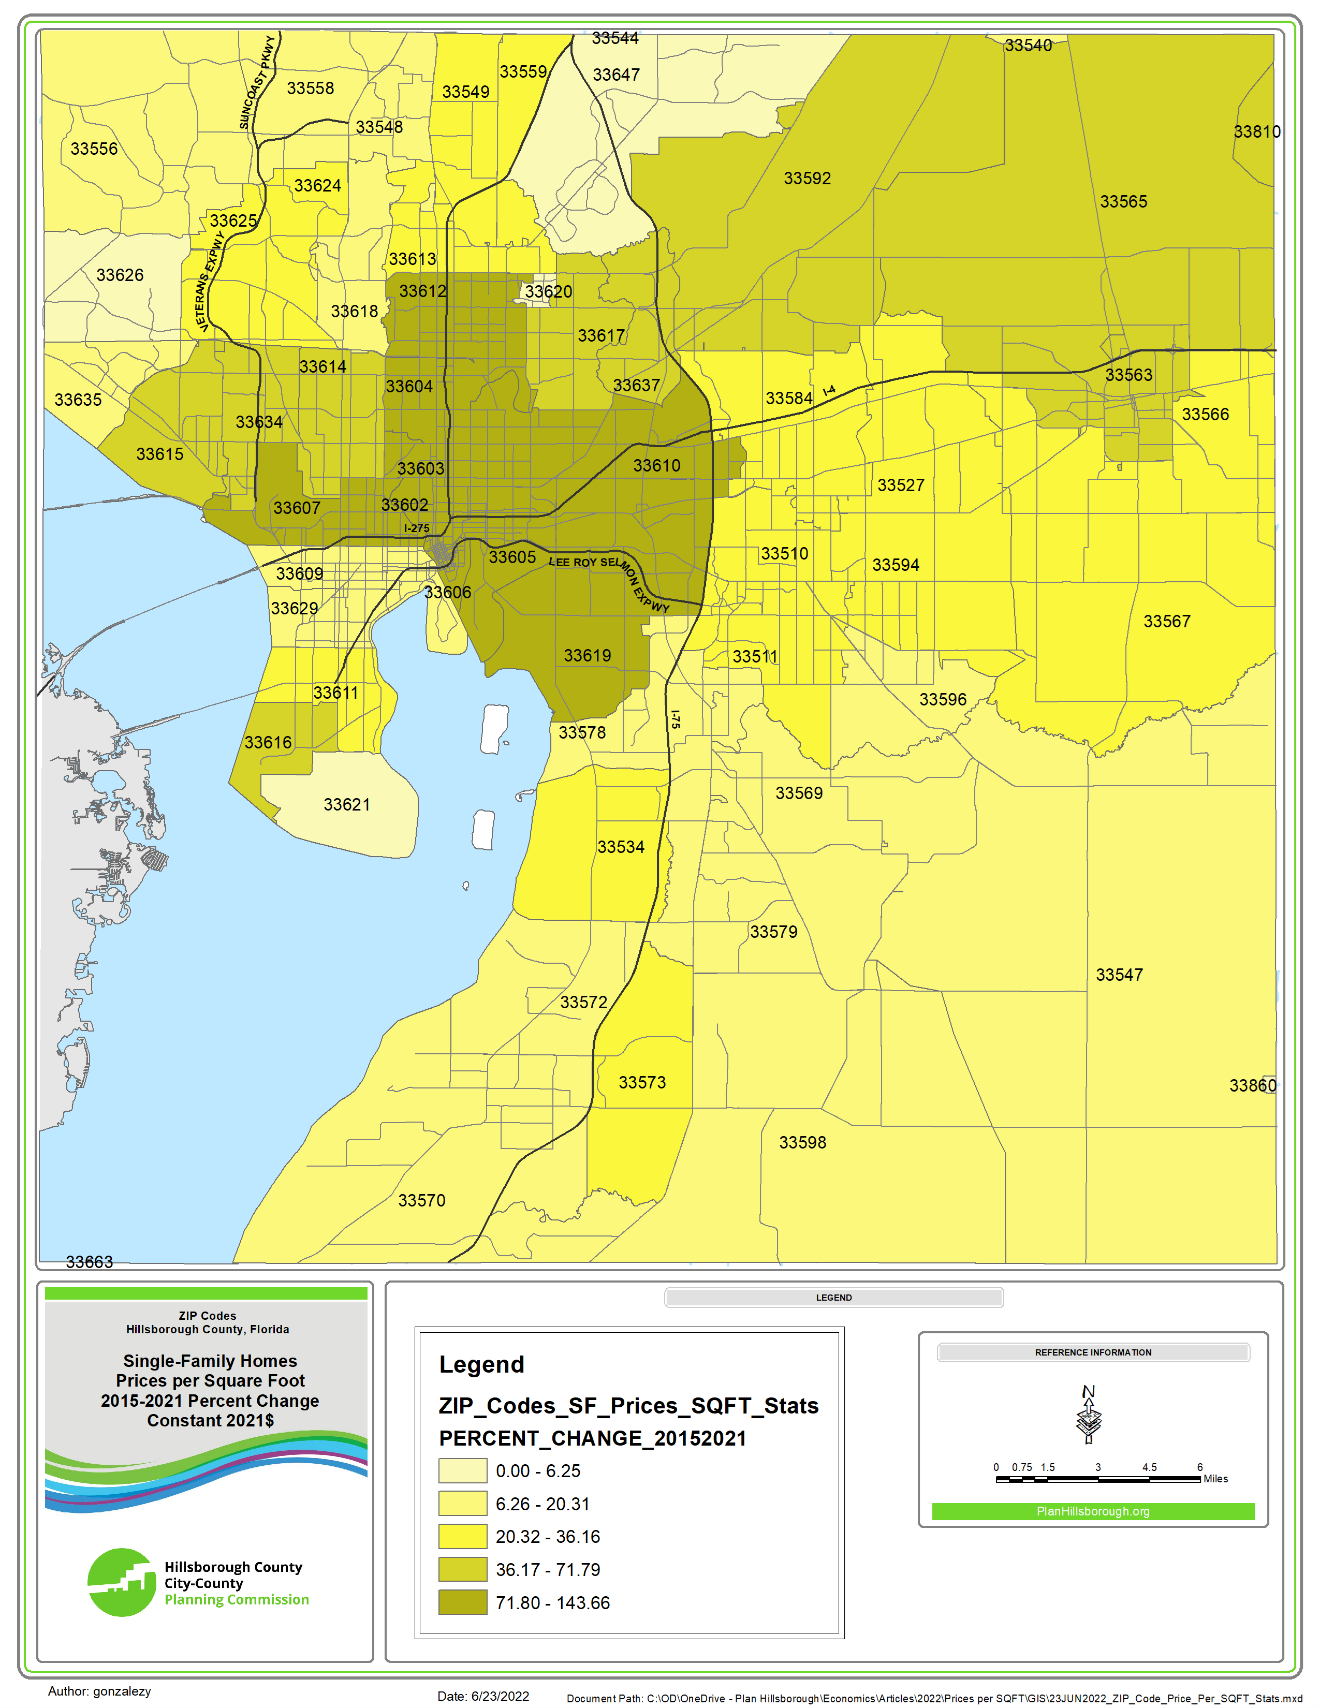 This map shows 2015-2021 percent change in median price per square foot for single-family homes by ZIP Code. The map shows that changes ranged from 0% to 143.66%. Darker yellow denotes higher percent change. The largest changes were observed in Central Tampa, Westshore and the Brandon/Riverview Area.